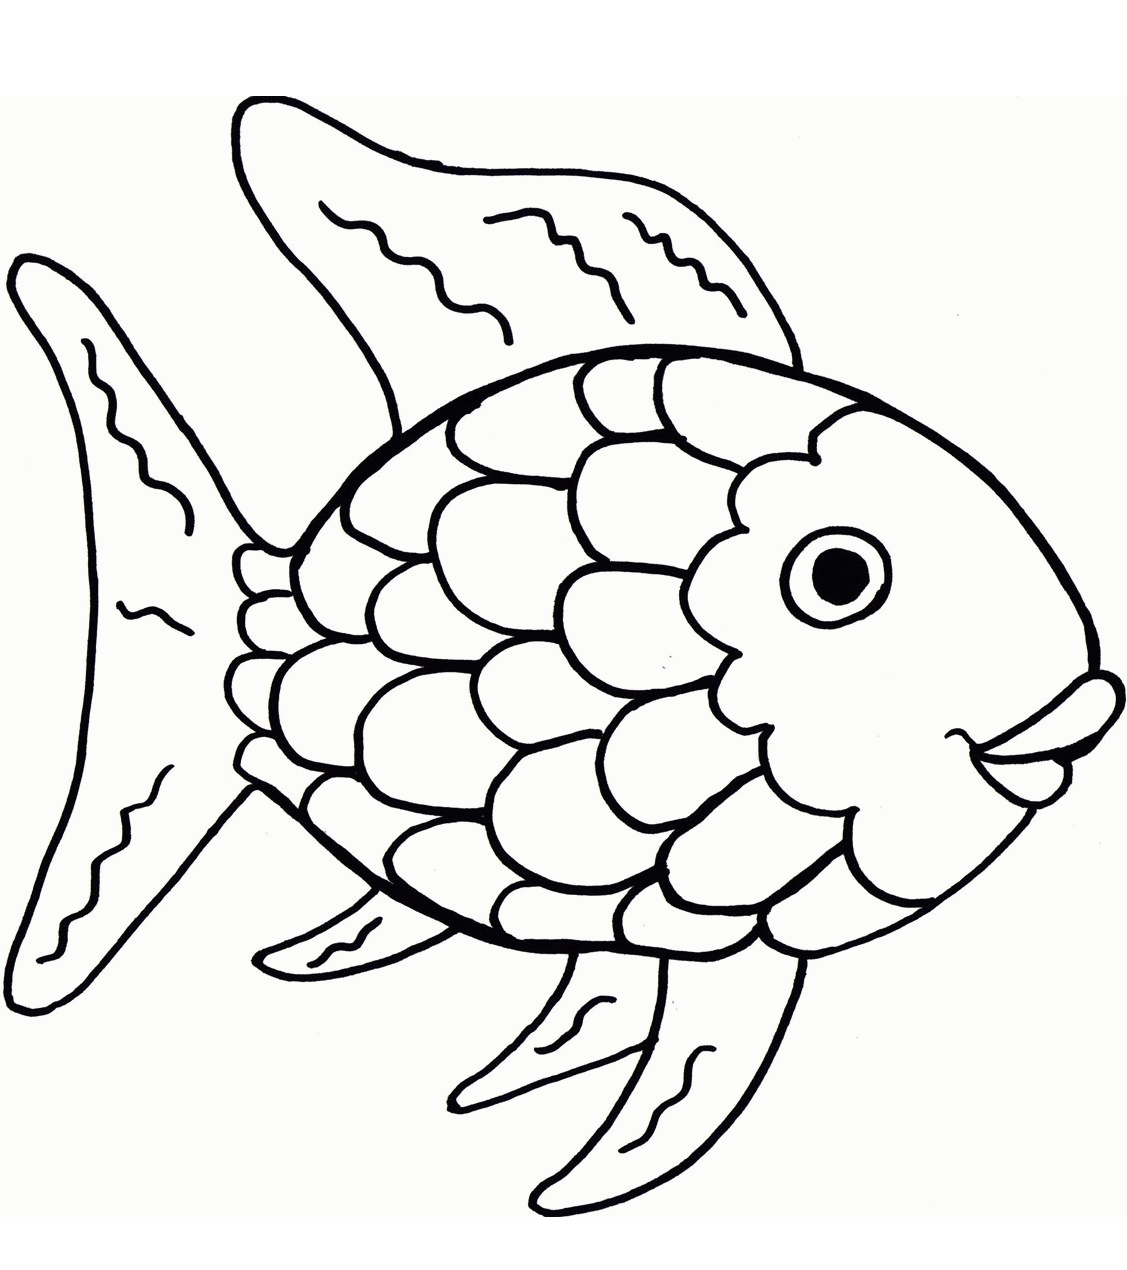 The Rainbow Fish Coloring Page - Free Printable Coloring Pages for Kids